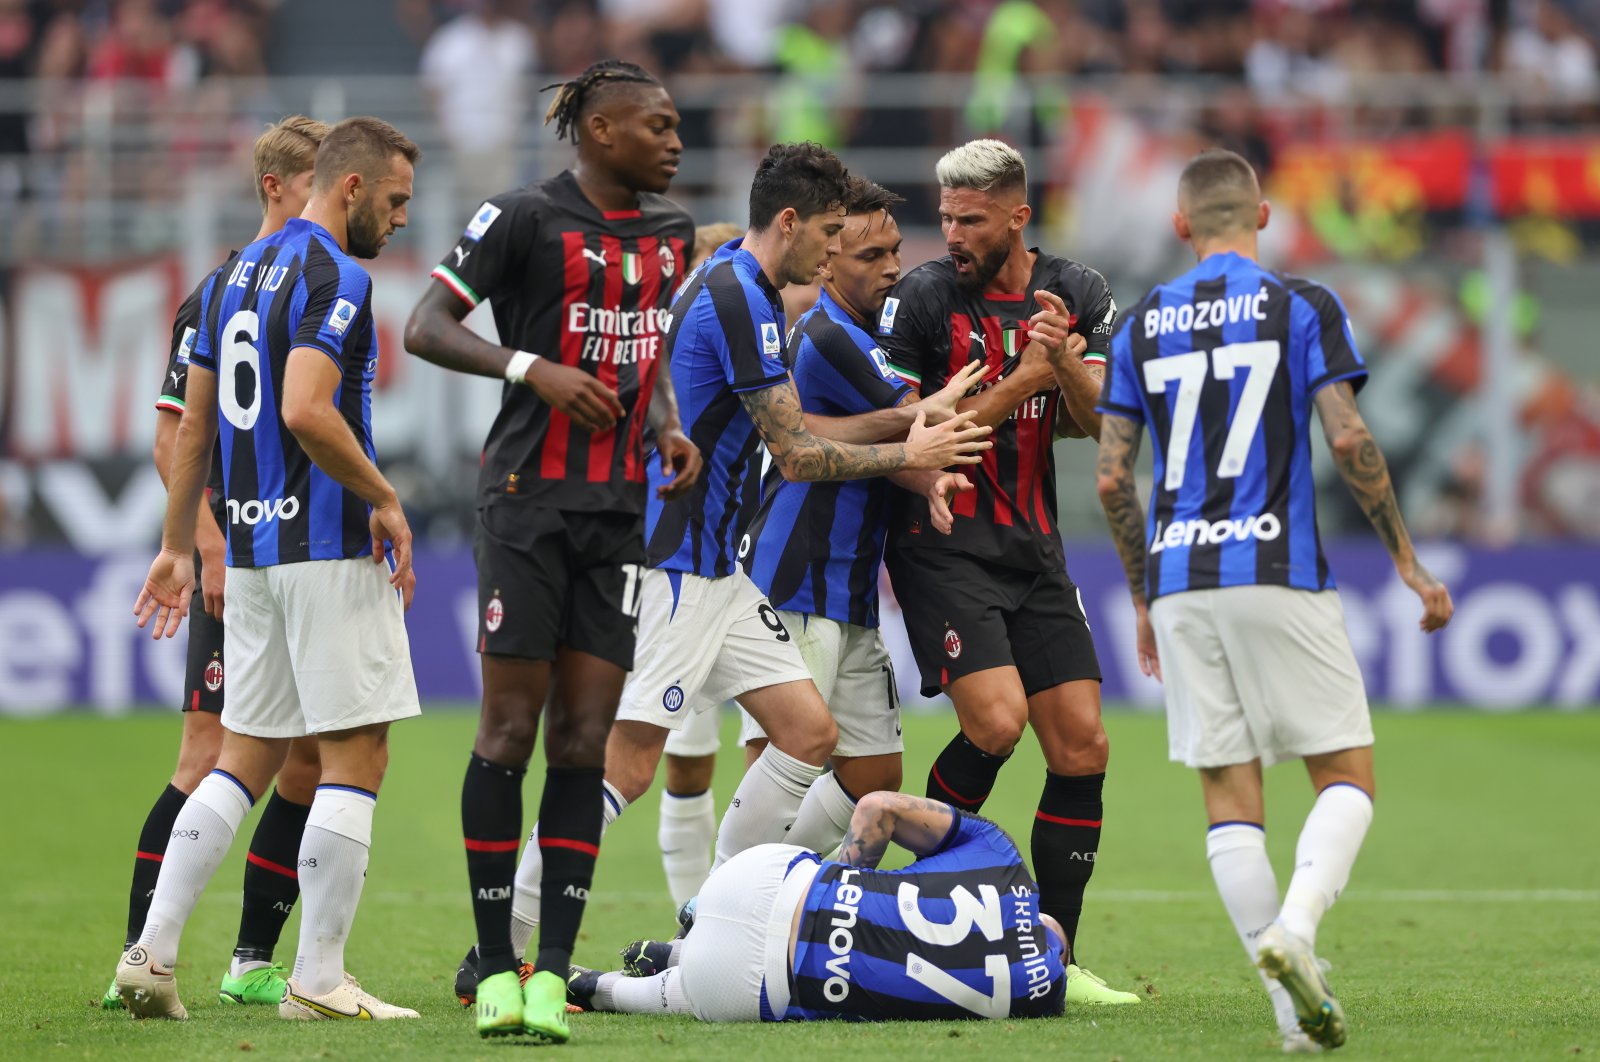 Inter&#039;s Lautaro Martinez (L) restrains Milan&#039;s Olivier Giroud (R) as tempers flare during the Serie A at Stadio Giuseppe Meazza,  Milan, Italy, Sept. 3, 2022. (Getty Images Photo)